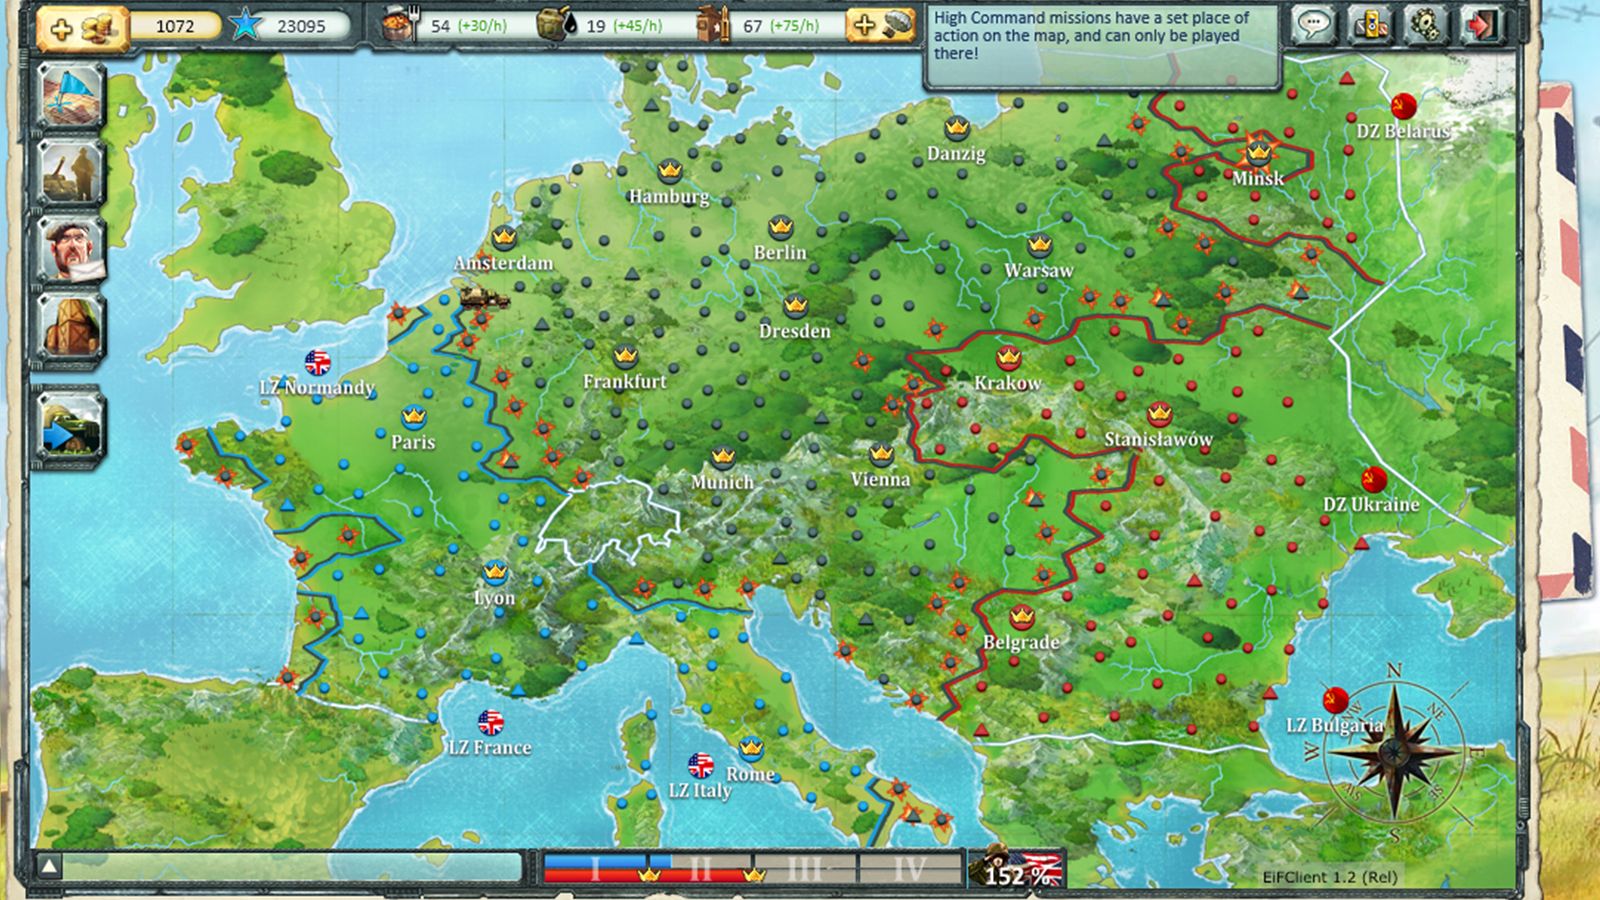 Revision of the browser game WARSTORY - Europe in Flames